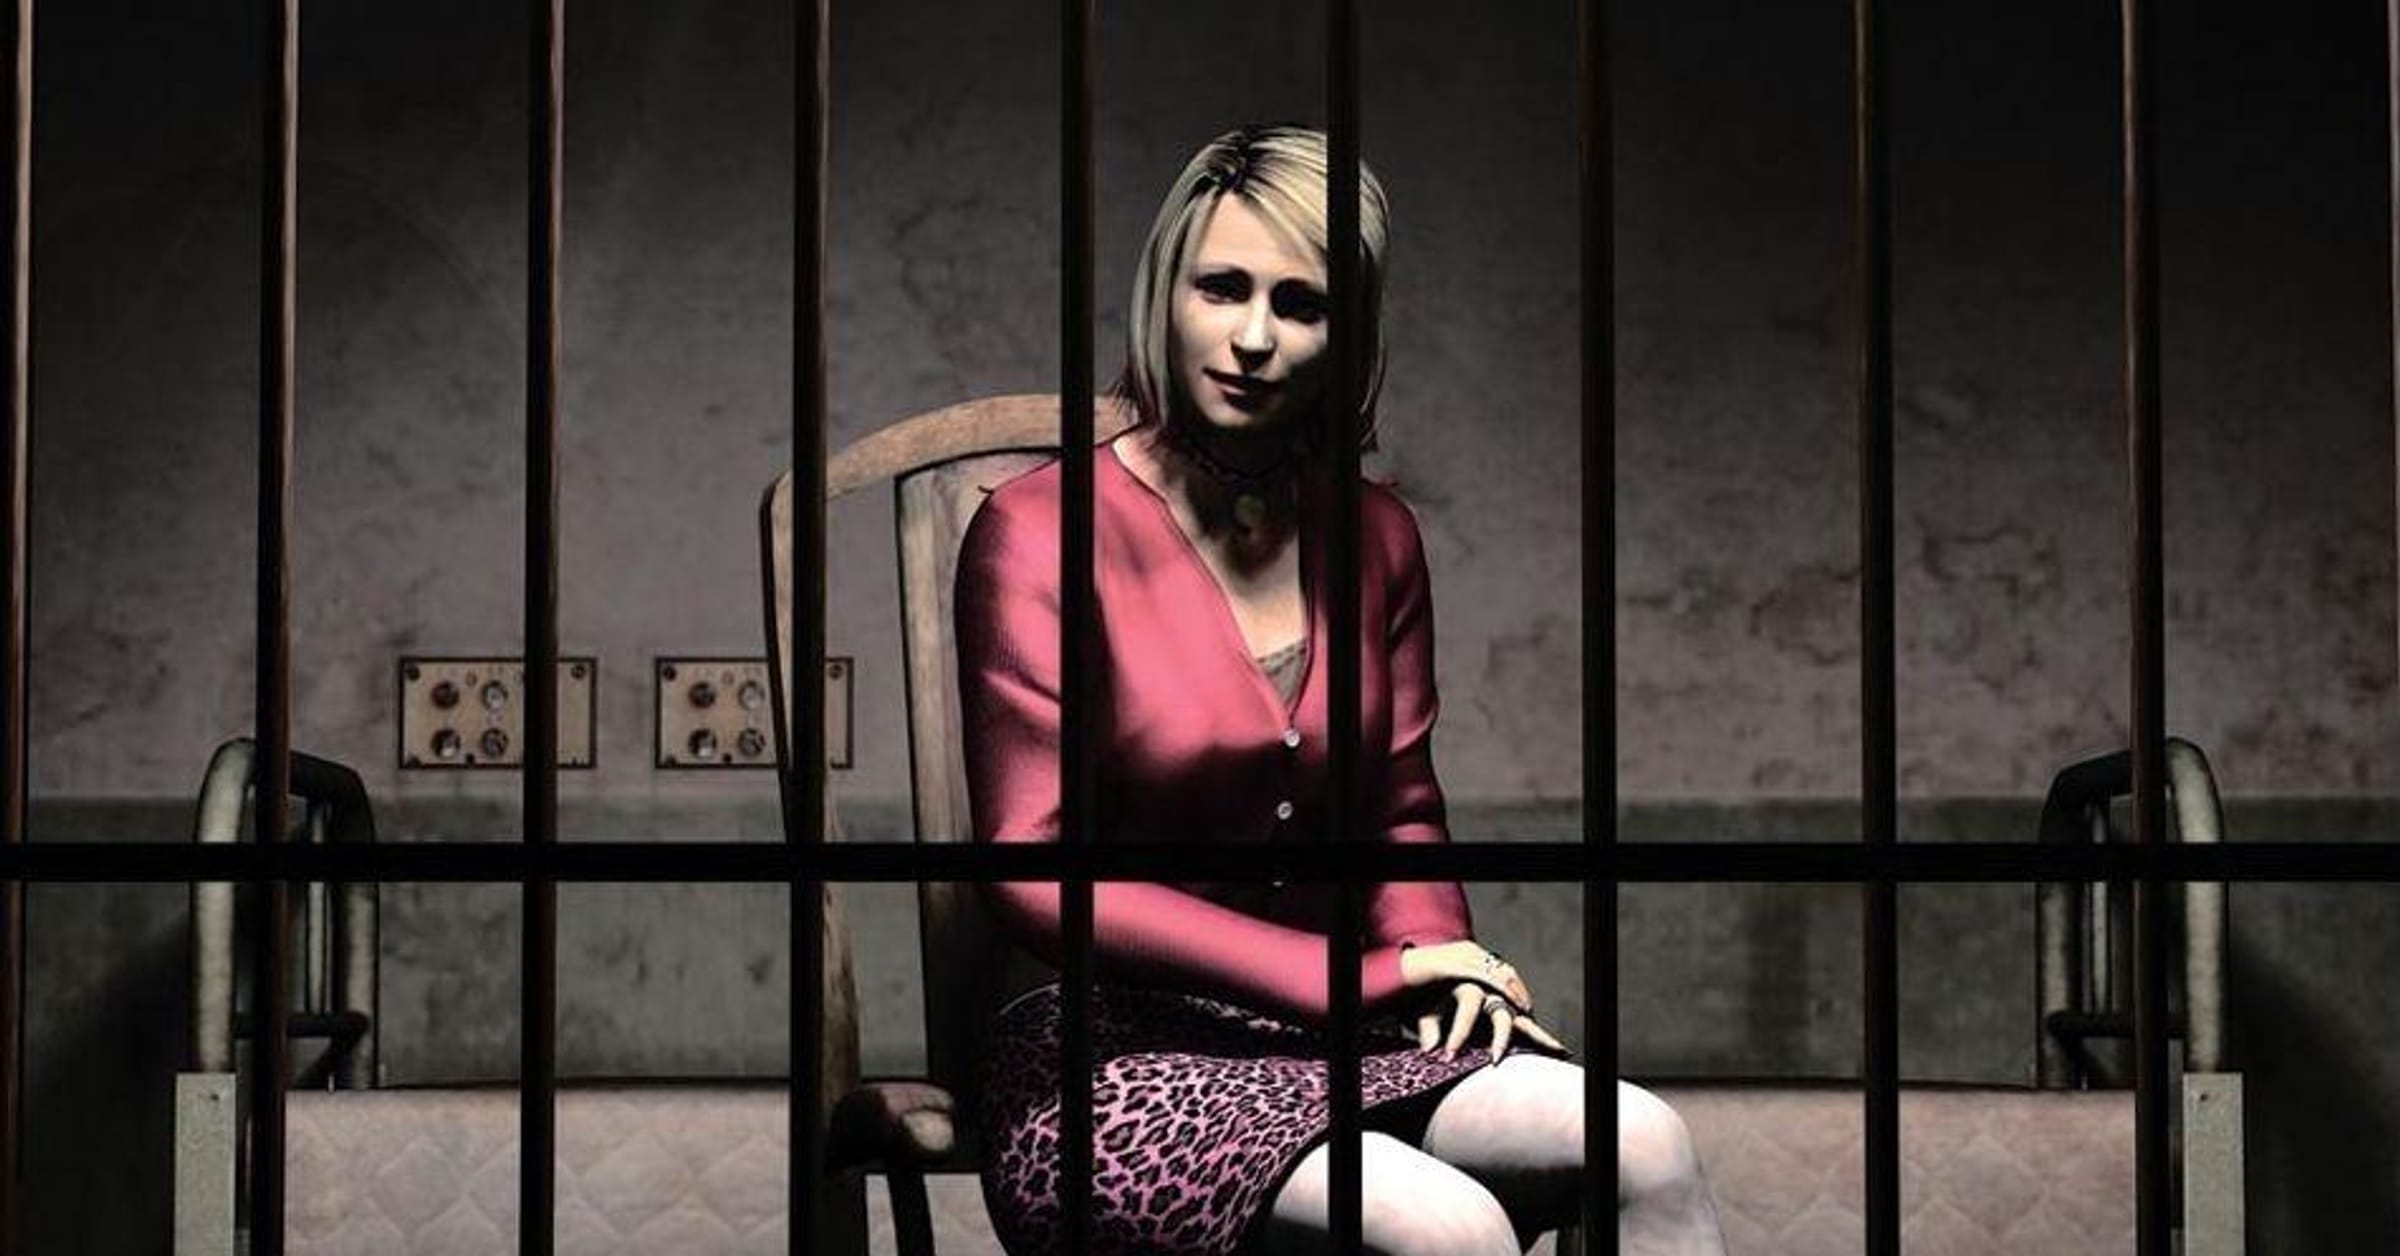 Silent Hill 2 Has the Best Depiction of an Abuse Survivor in Games